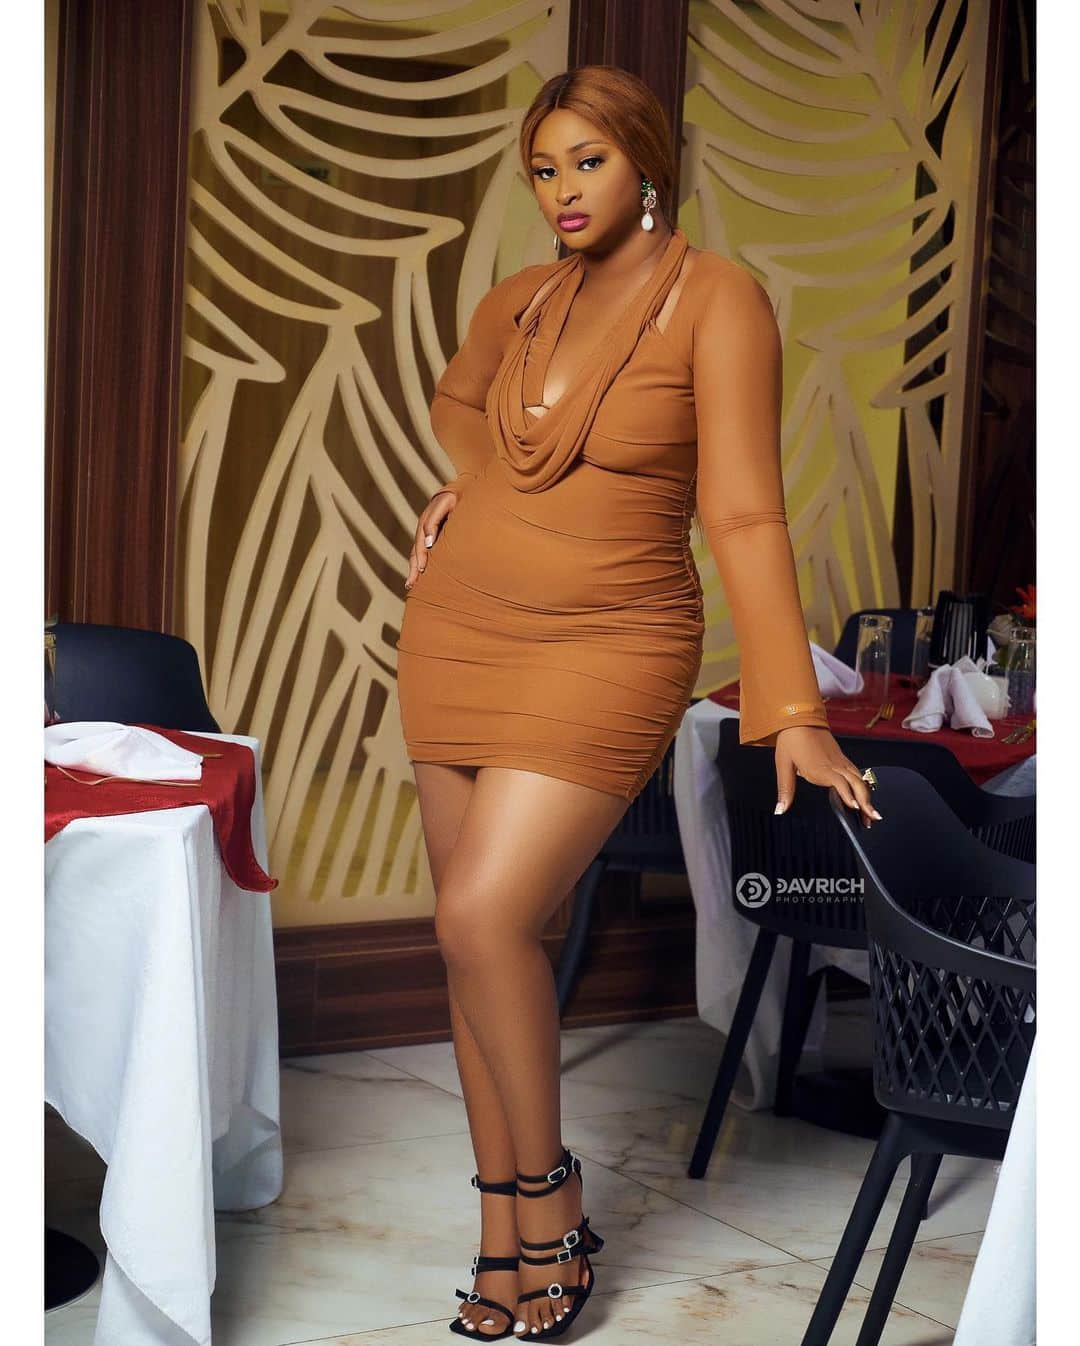 "My ex-husband once told me he's not my friend; that he's my lord" – Etinosa tearfully recounts ordeal